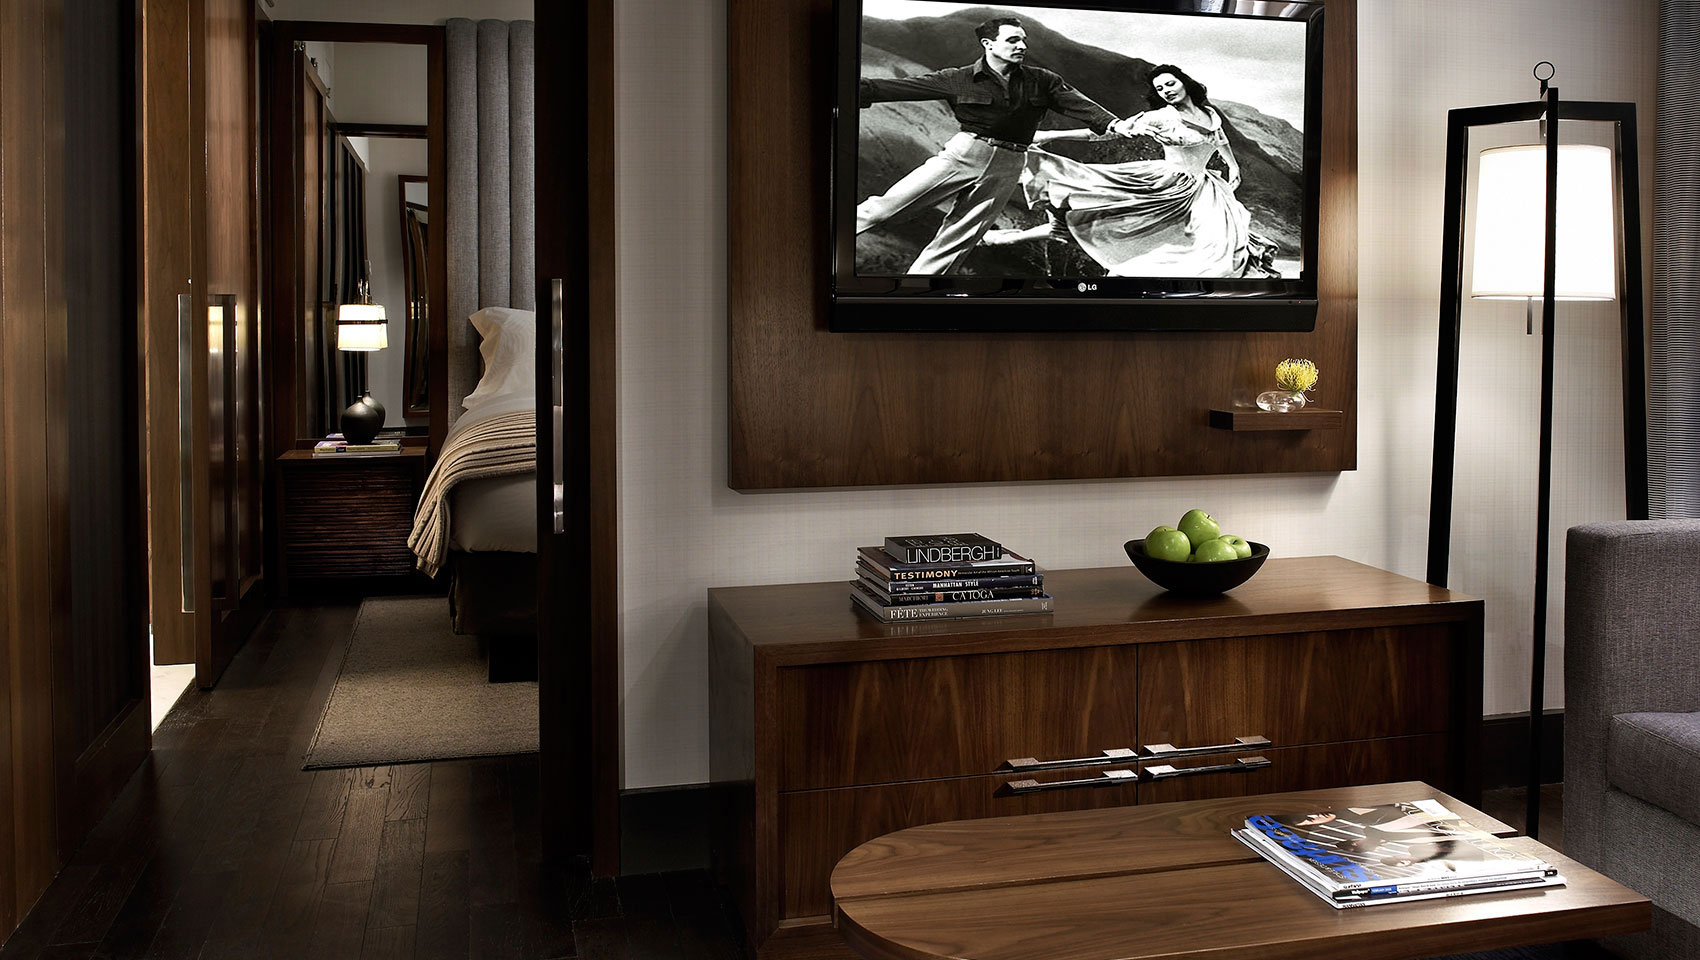 Kimpton Hotel Eventi Executive King Suite showing living area with TV and open doorway peering into bedroom